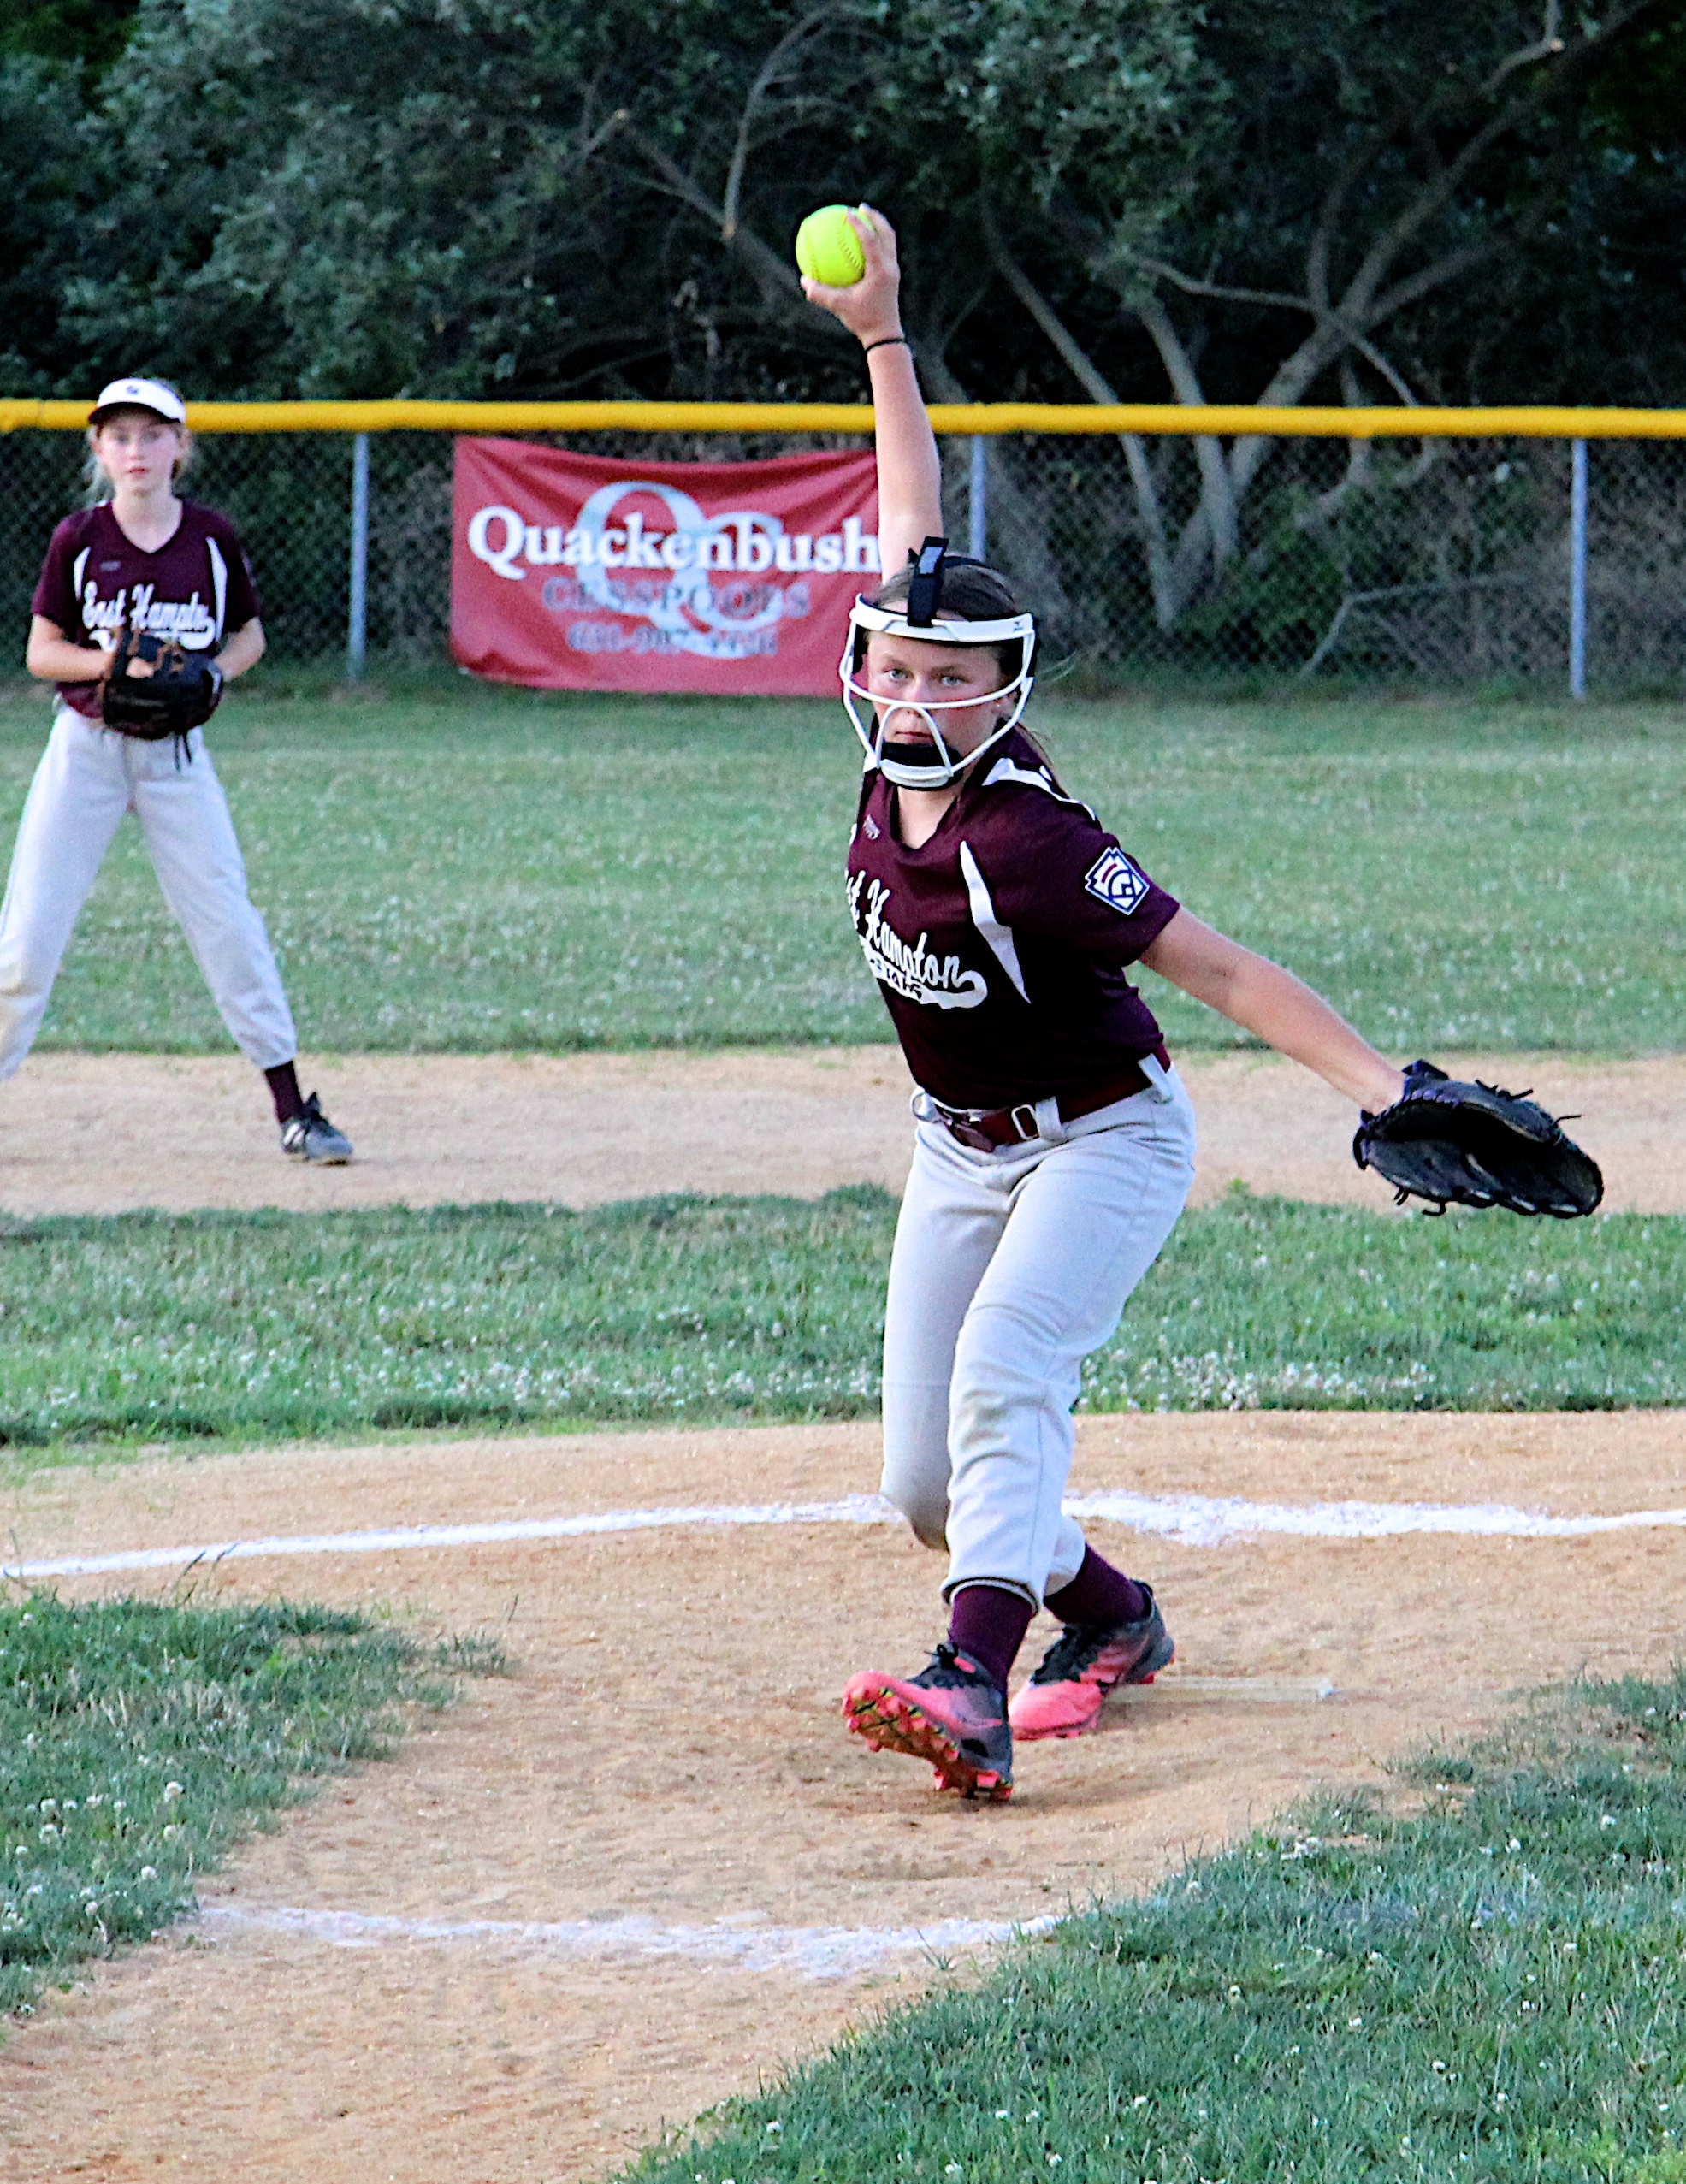 The East Hampton Minors softball All-Stars defeated North Shore Little League, 22-15, in game one of the District 36 Championships at Pantigo Field on July 6, but then lost the second game two days later, allowing North Shore to claim the district title.  KYRIL BROMLEY